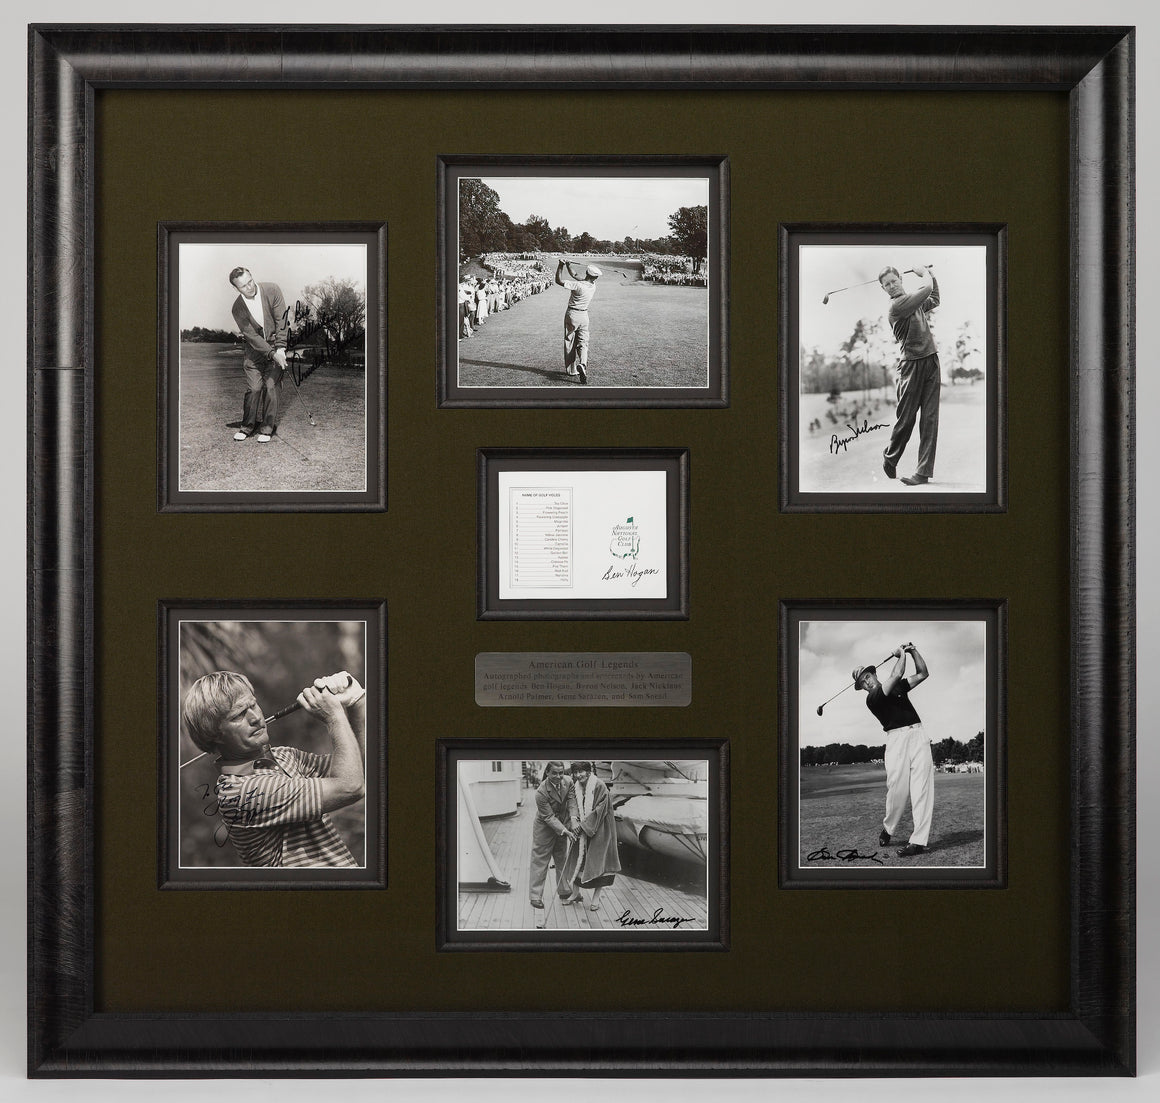 American Golf Legends Collage, with Signatures of Palmer, Nicklaus, Hogan, Sarazen, Nelson, and Sneed